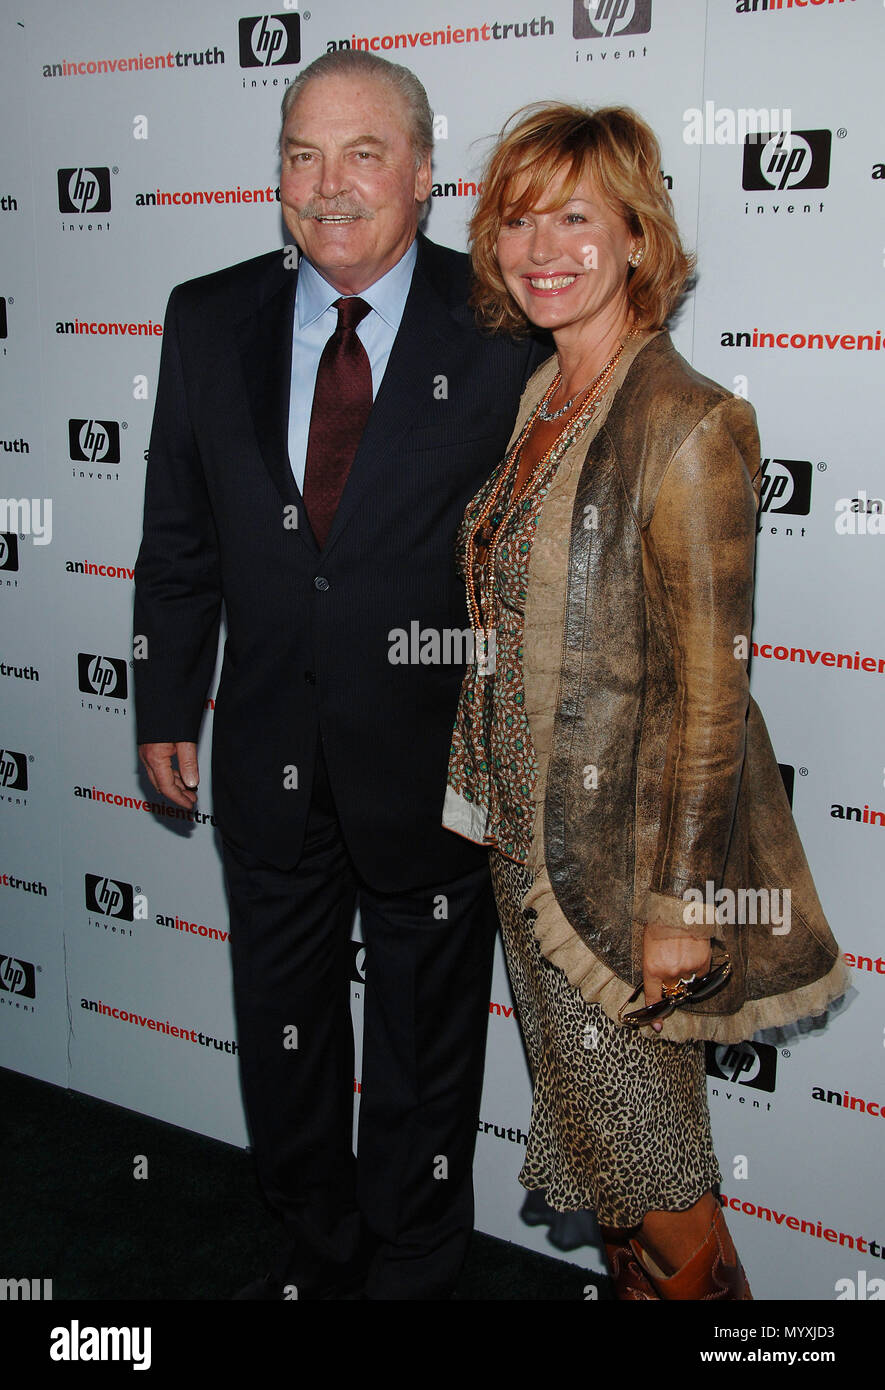 Stacy Keach and wife arriving at " AN INCONVENIENT TRUTH Premiere " at the DGA in Los Angeles. May 16, 2006.KeachStacy_wife122  Event in Hollywood Life - California, Red Carpet Event, USA, Film Industry, Celebrities, Photography, Bestof, Arts Culture and Entertainment, Celebrities fashion, Best of, Hollywood Life, Event in Hollywood Life - California, Red Carpet and backstage, Music celebrities, Topix, Couple, family ( husband and wife ) and kids- Children, brothers and sisters inquiry tsuni@Gamma-USA.com, Credit Tsuni / USA, 2006 to 2009 Stock Photo